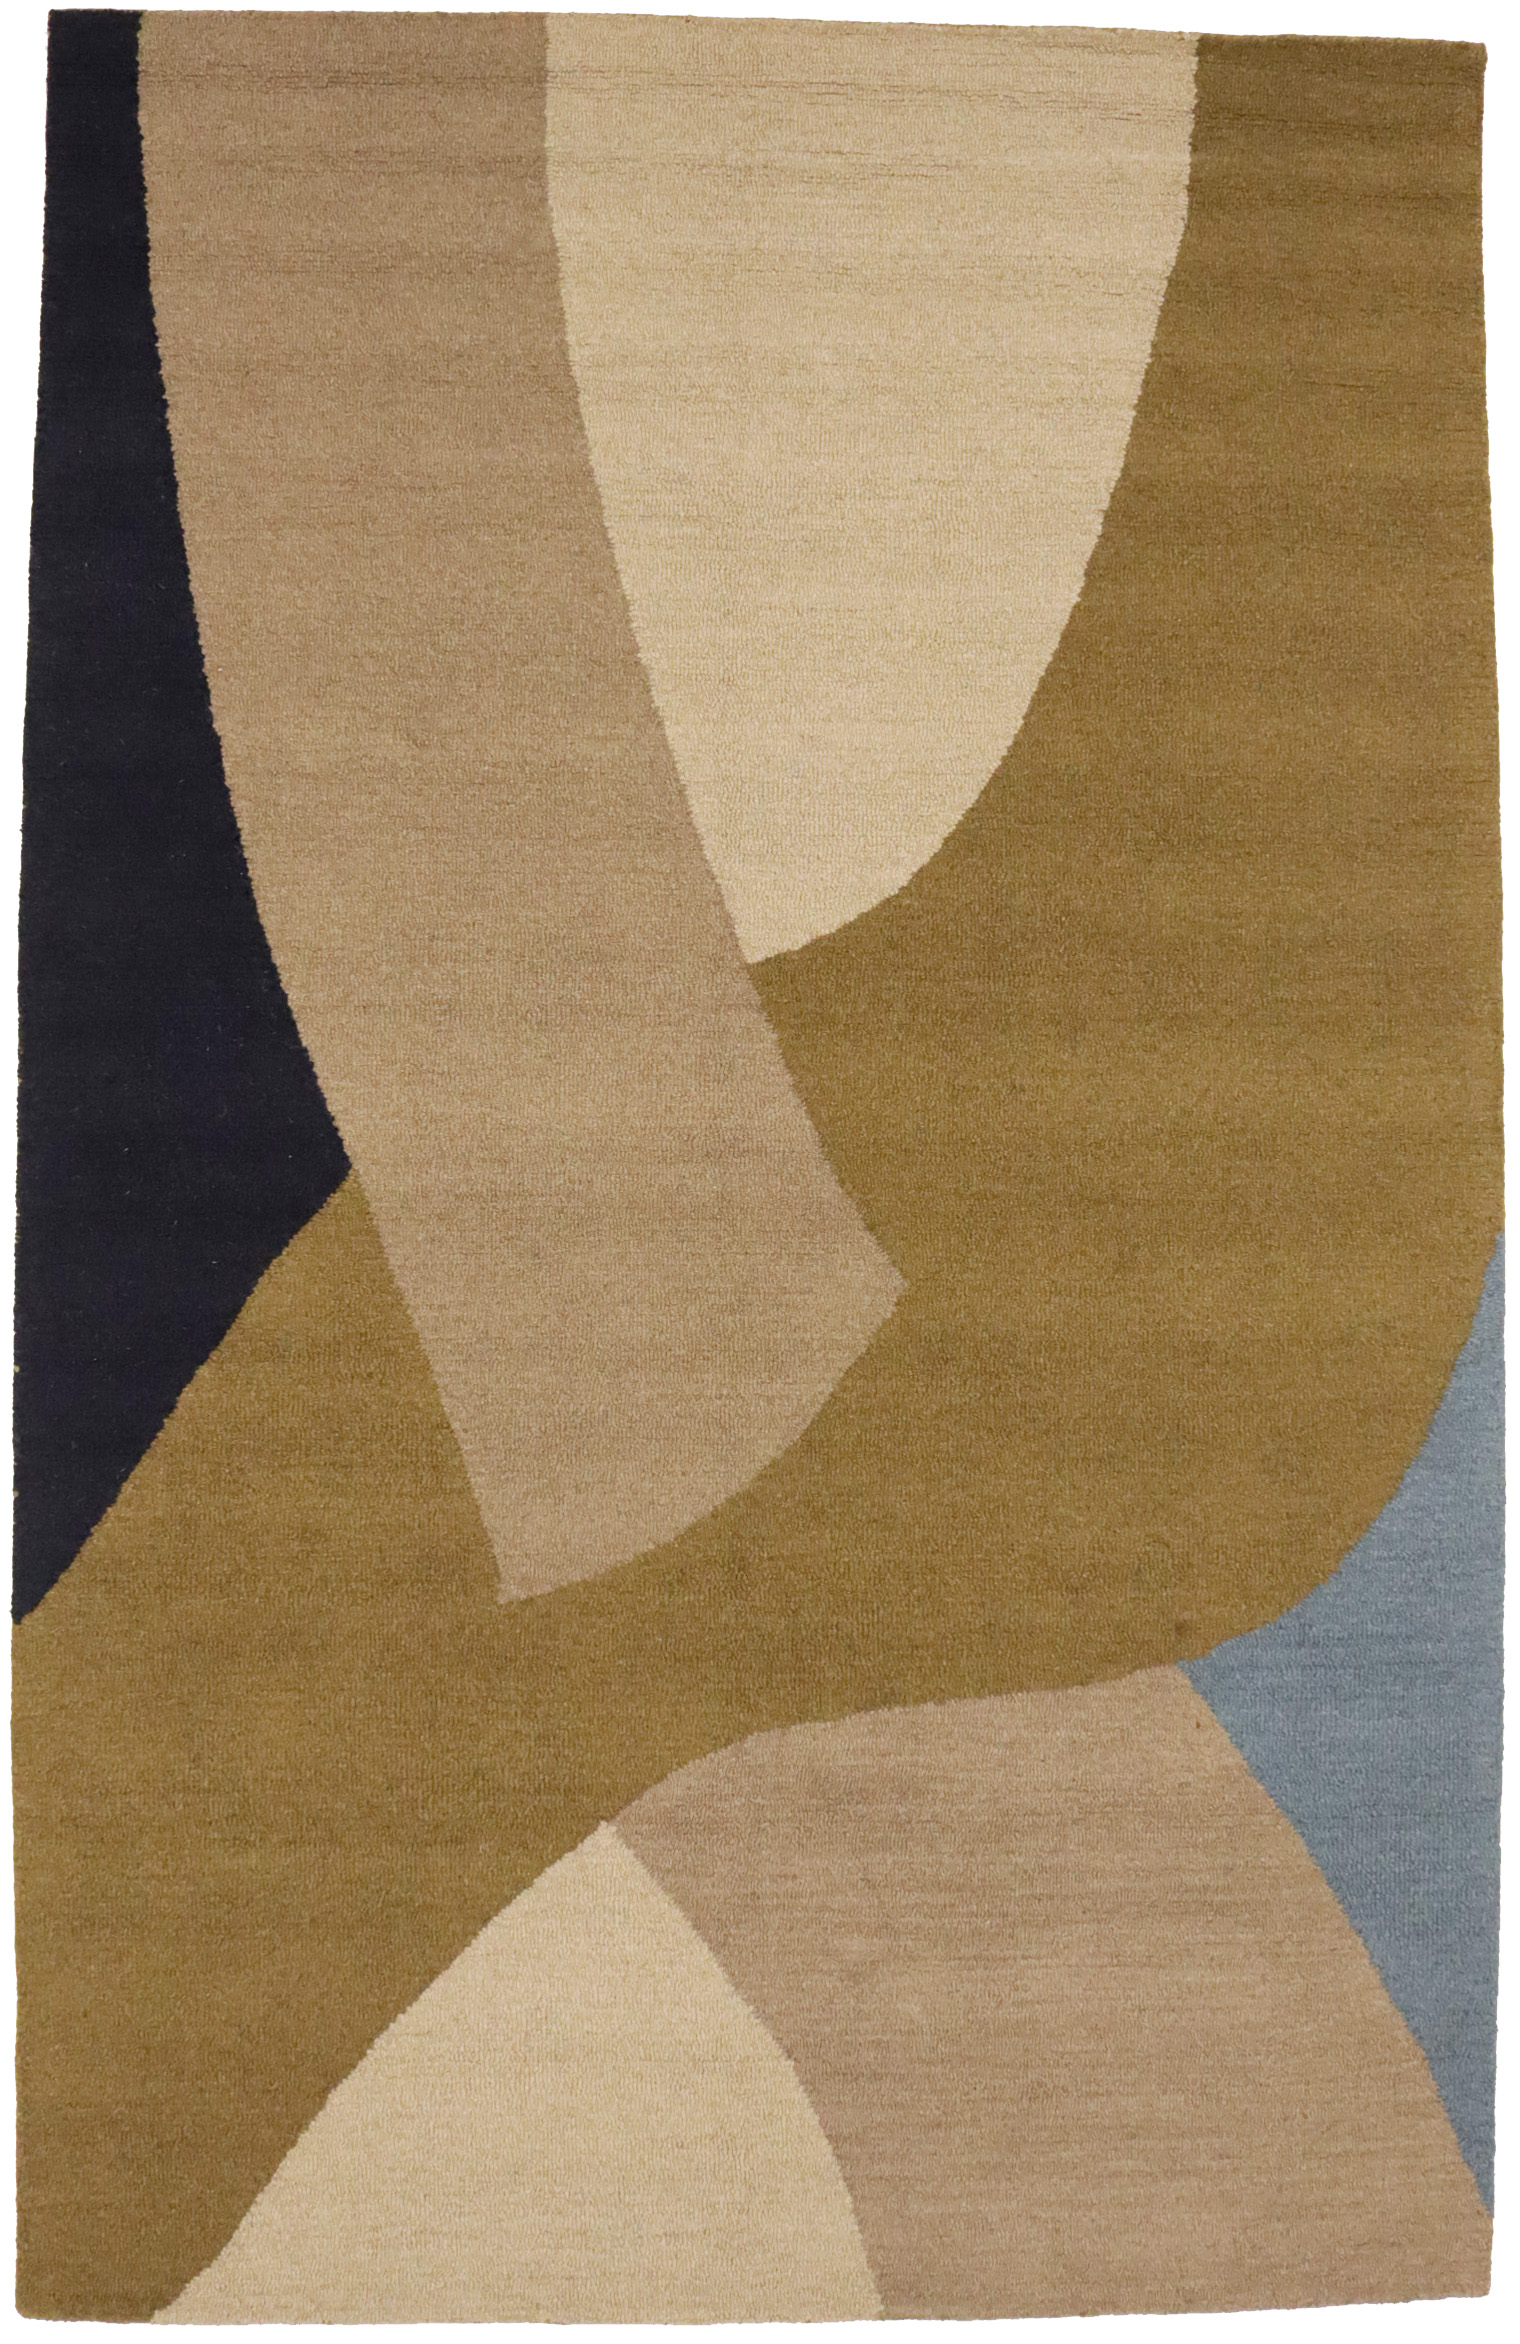 Malaga Donna Tribal Geometric Abstract Beige Distressed High-Low Rug